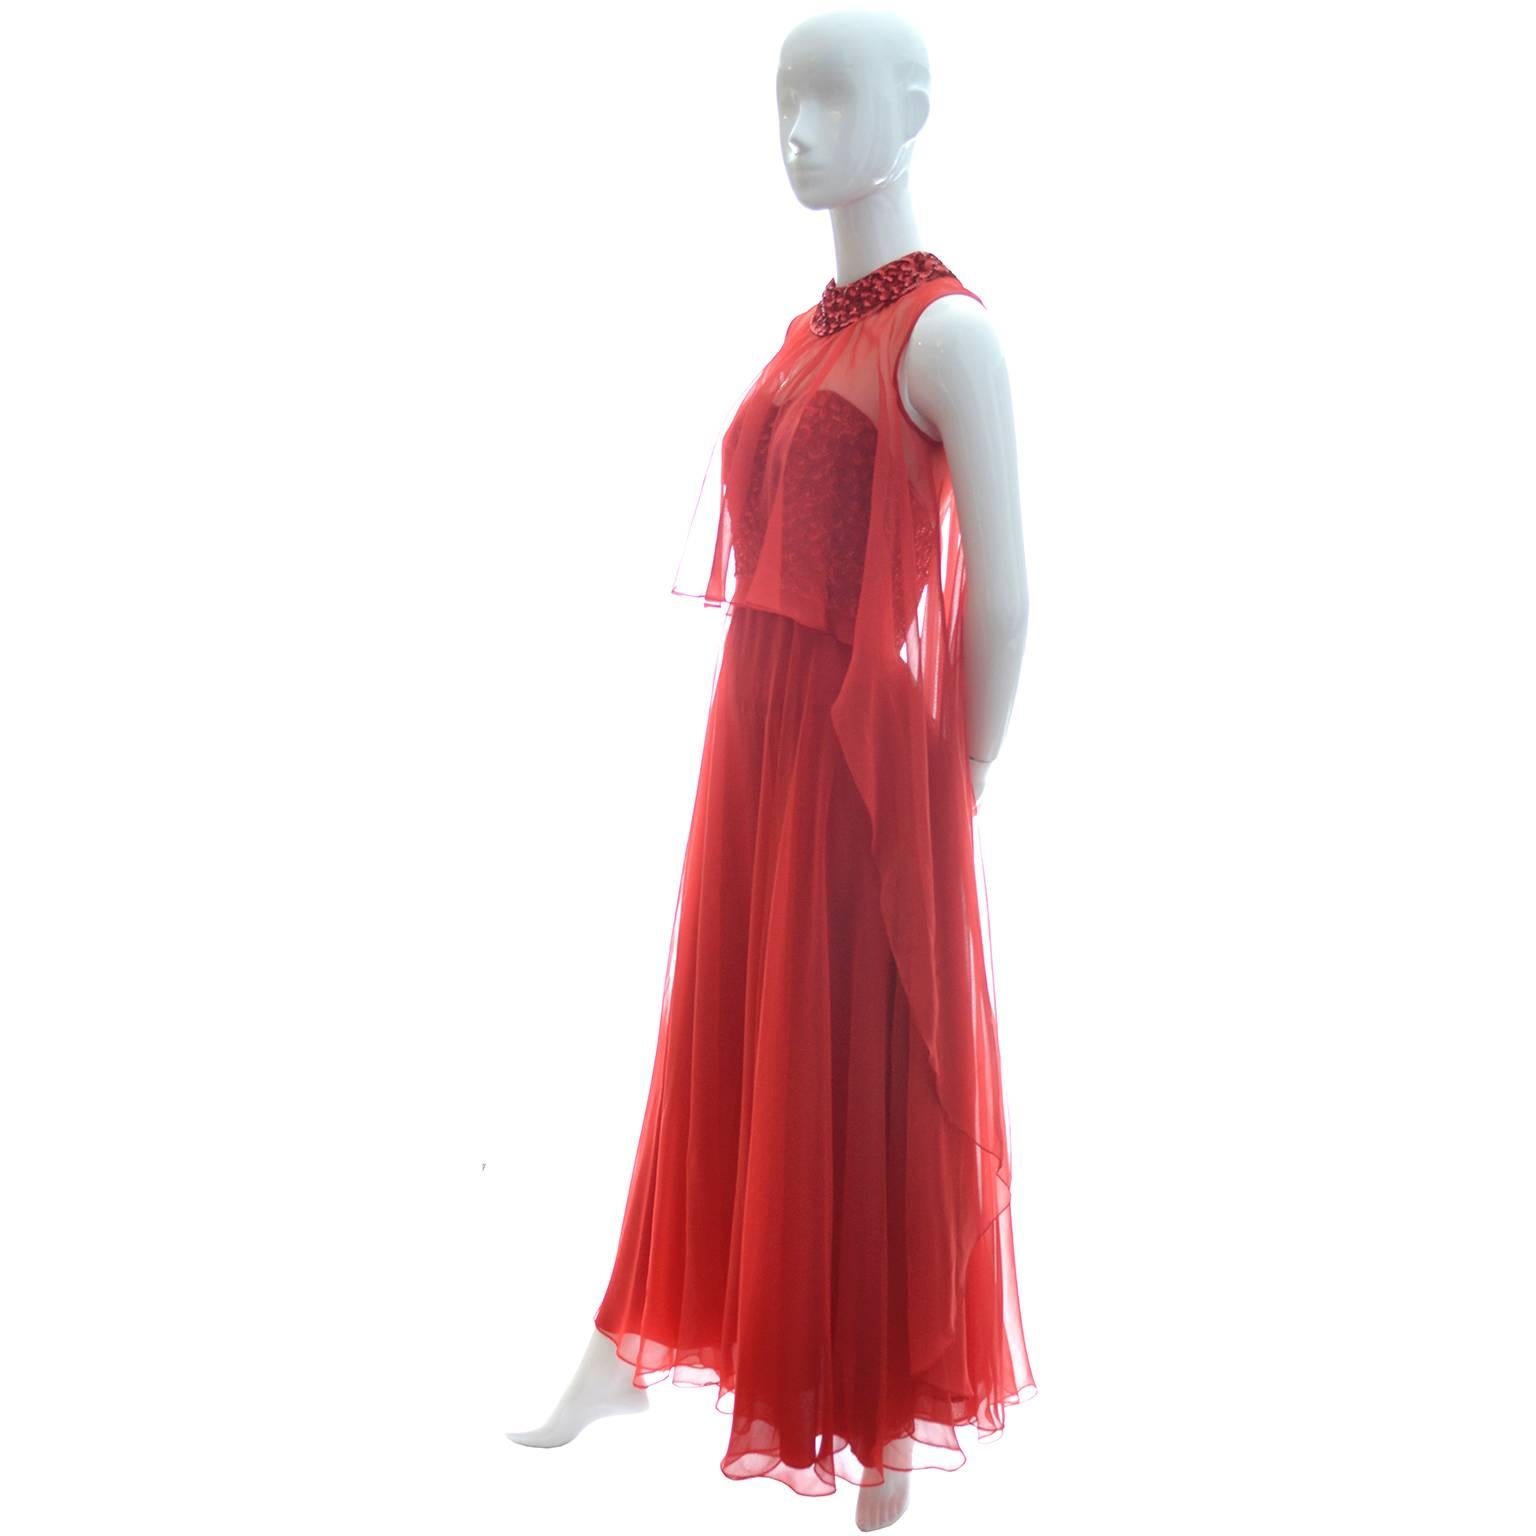 Women's 1970s Mike Benet Vintage Dress in Lipstick Red With Sequins & Sheer Overlay